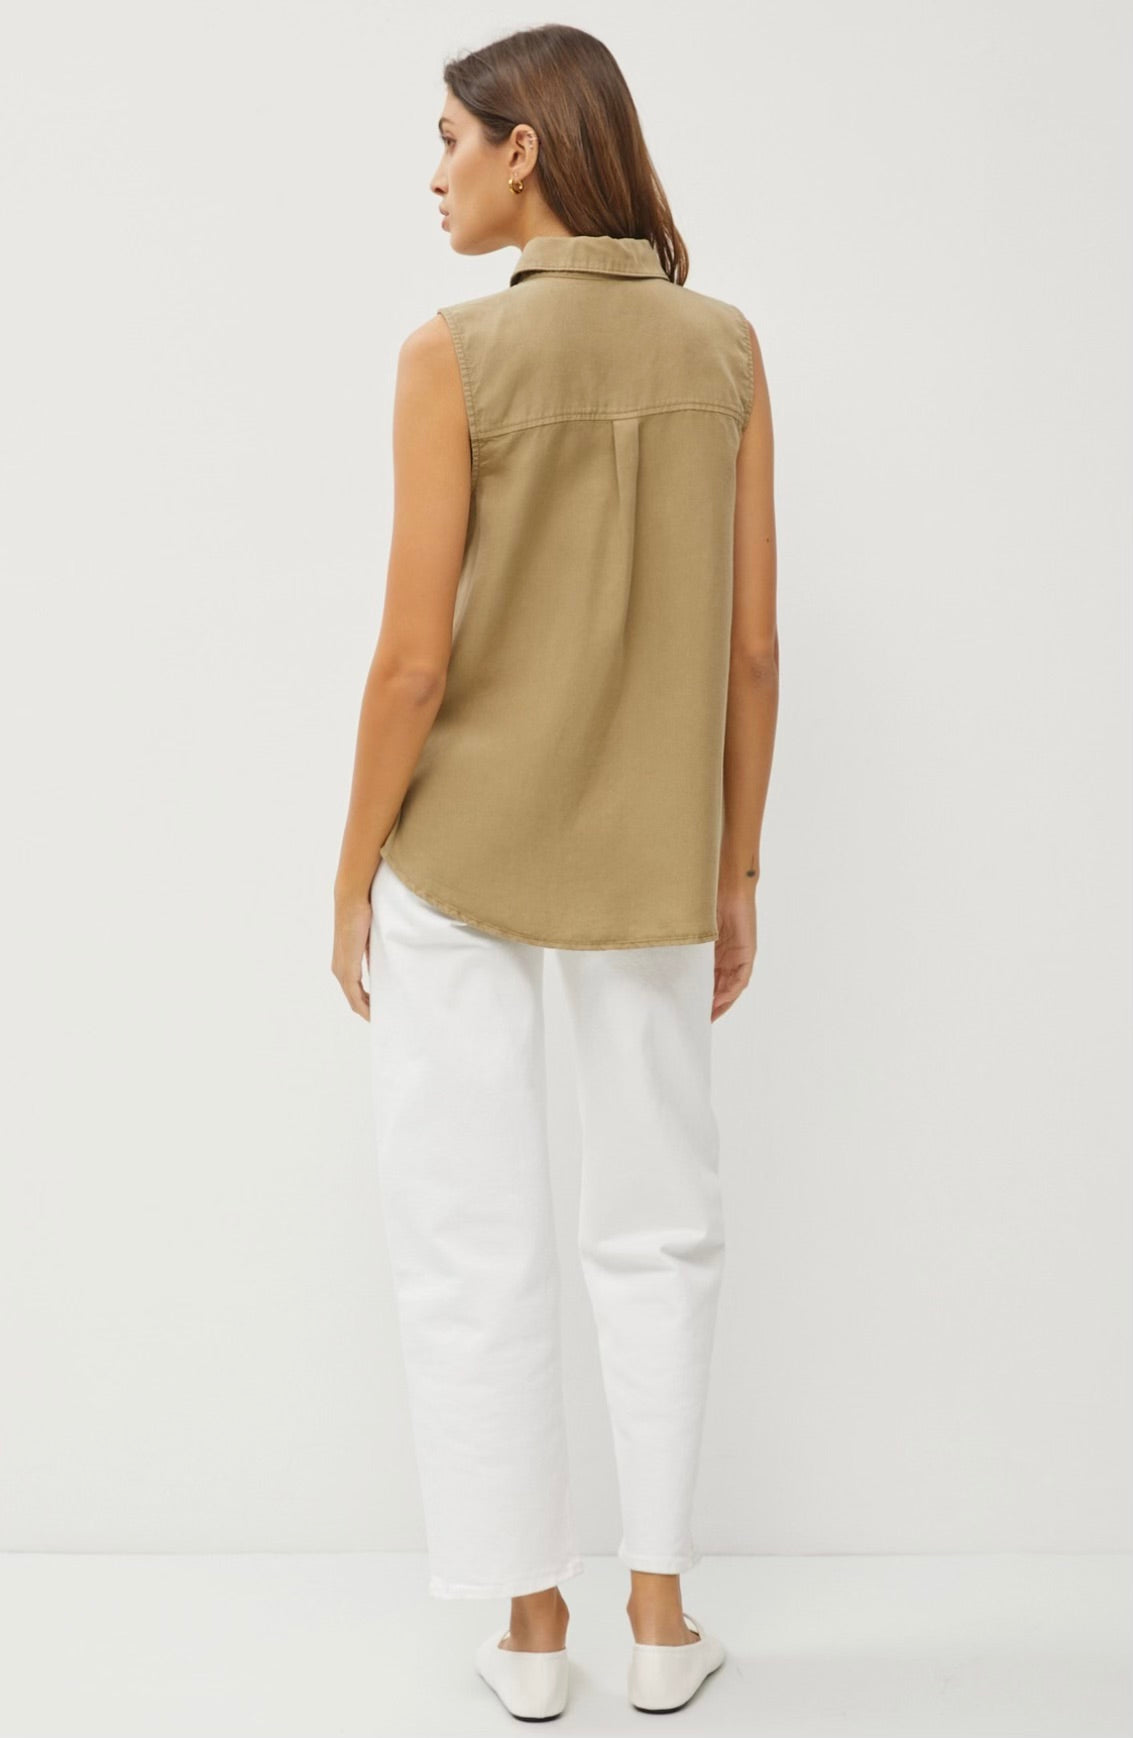 Olive Sleeveless Collared Top